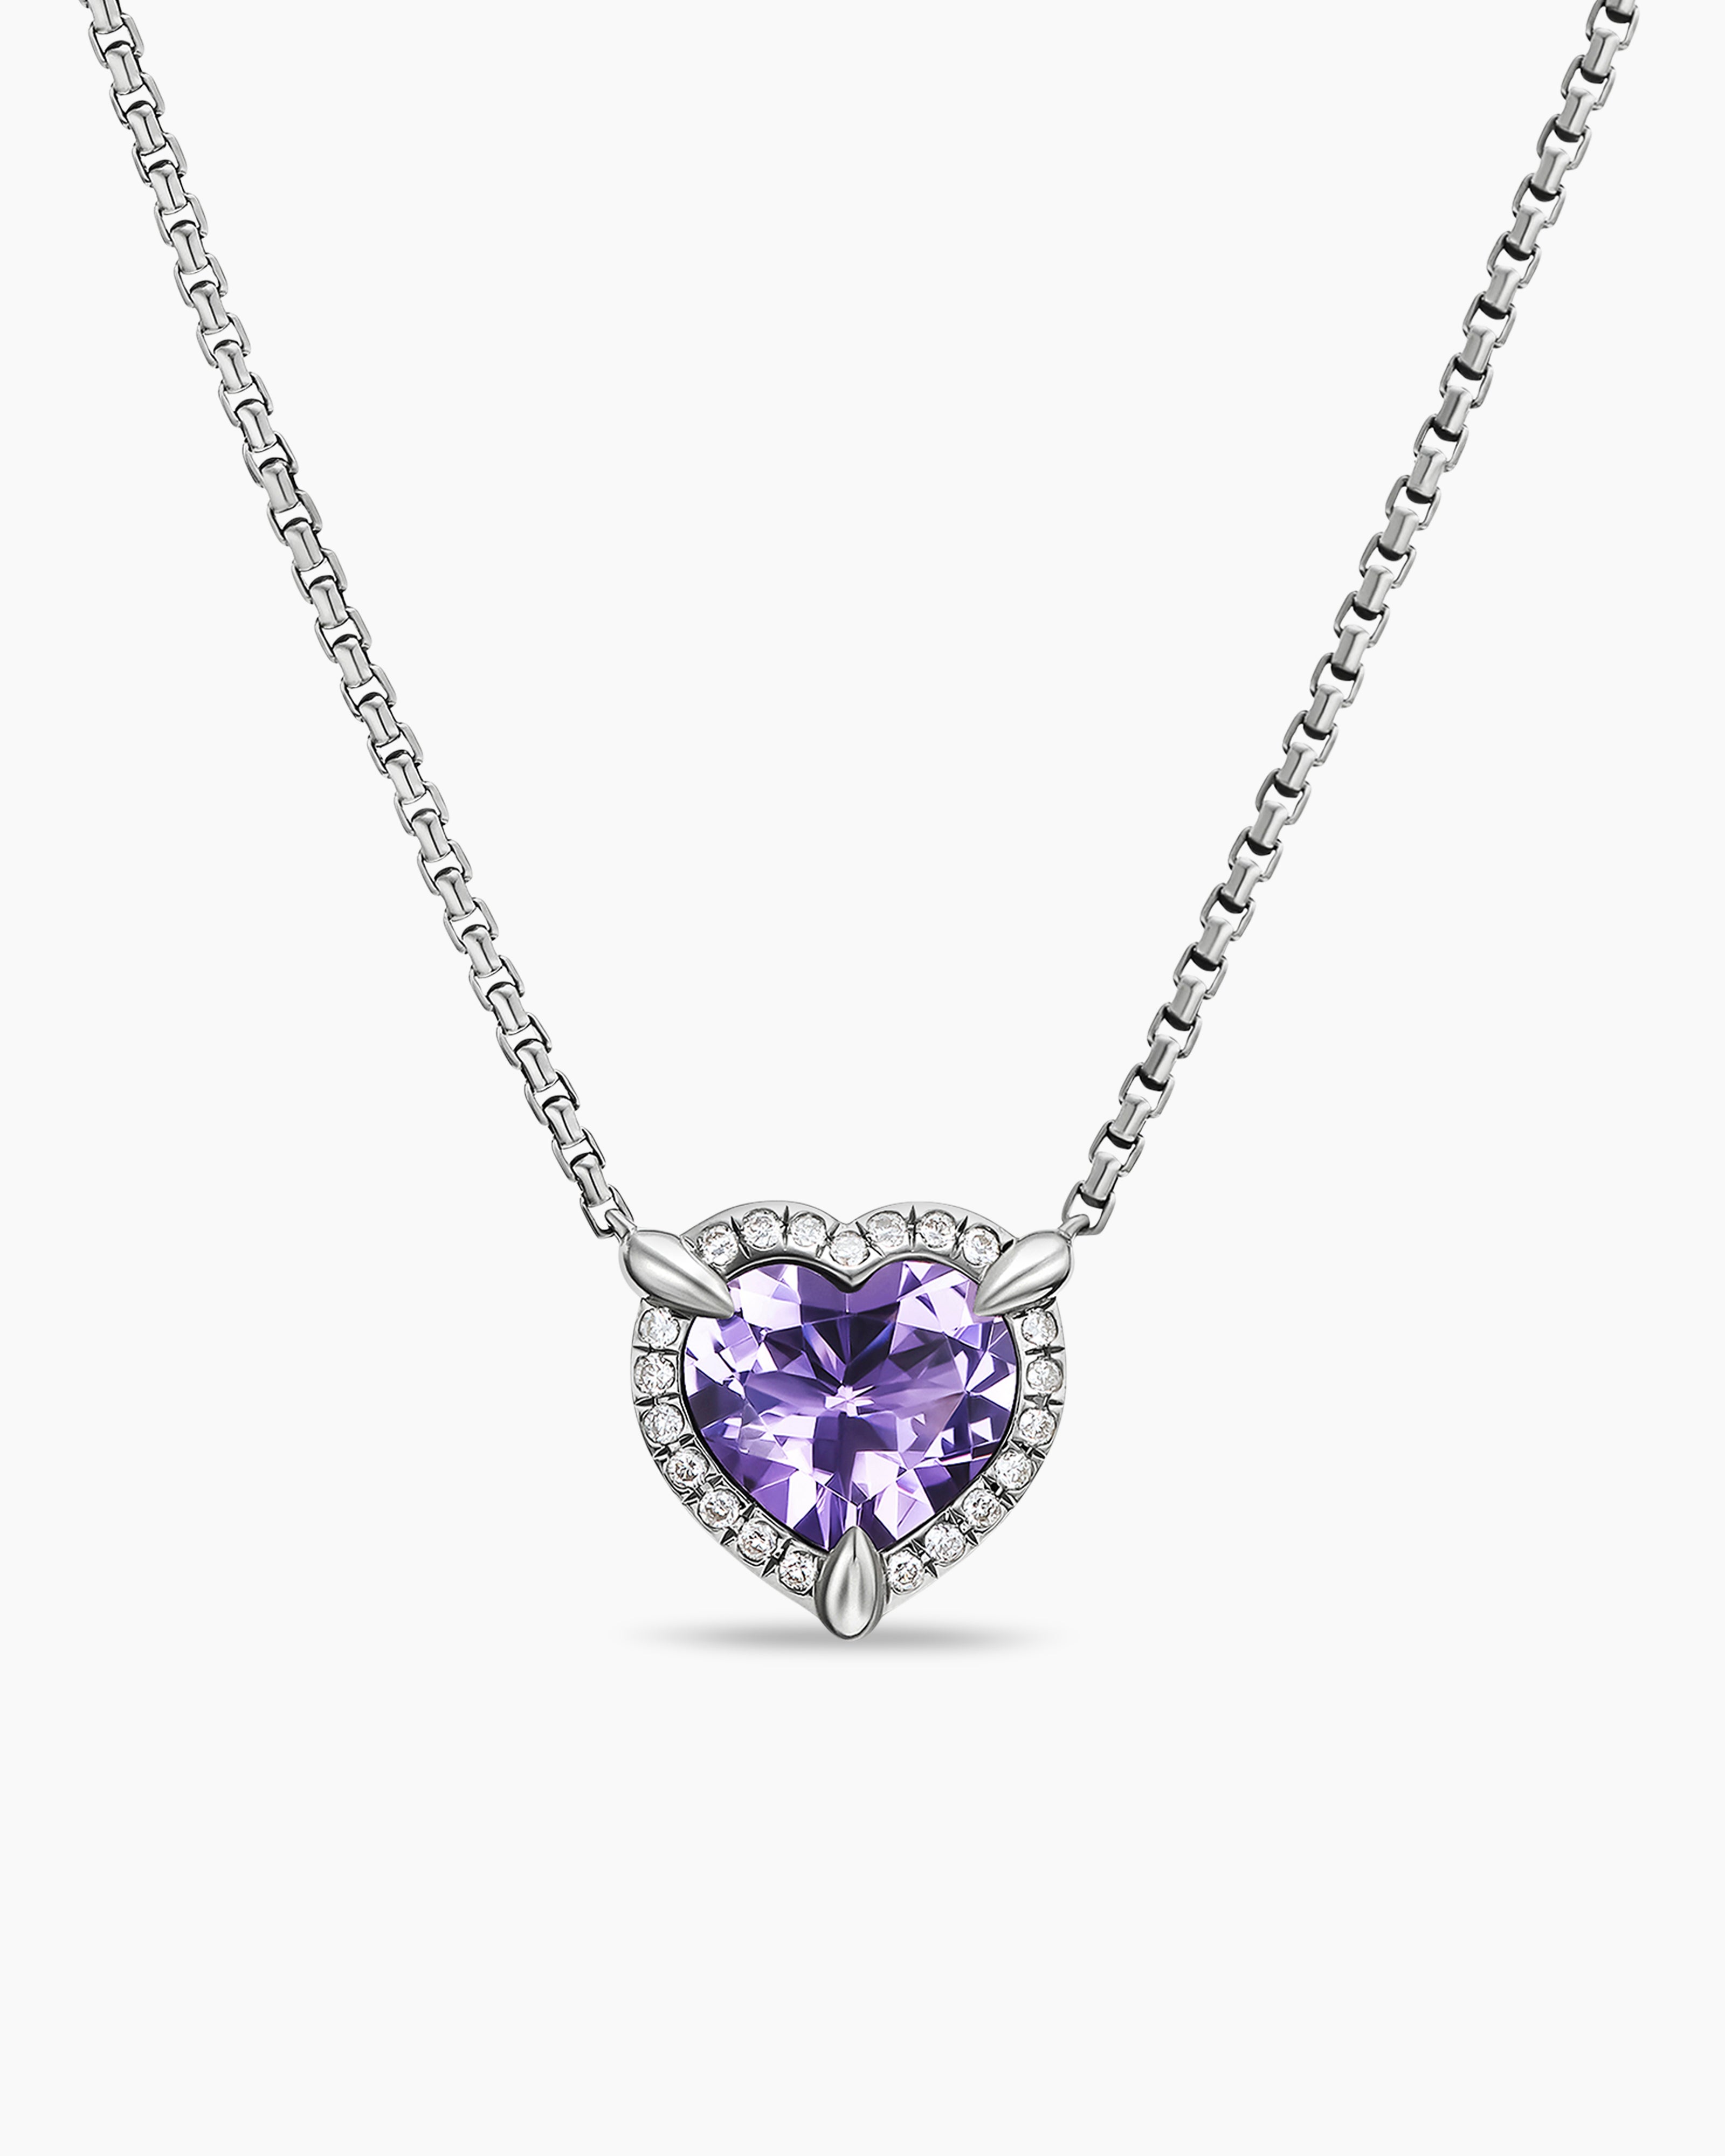 Tennis Chain Real 925 Sterling Silver Purple Amethyst Diamond Necklace  16-28